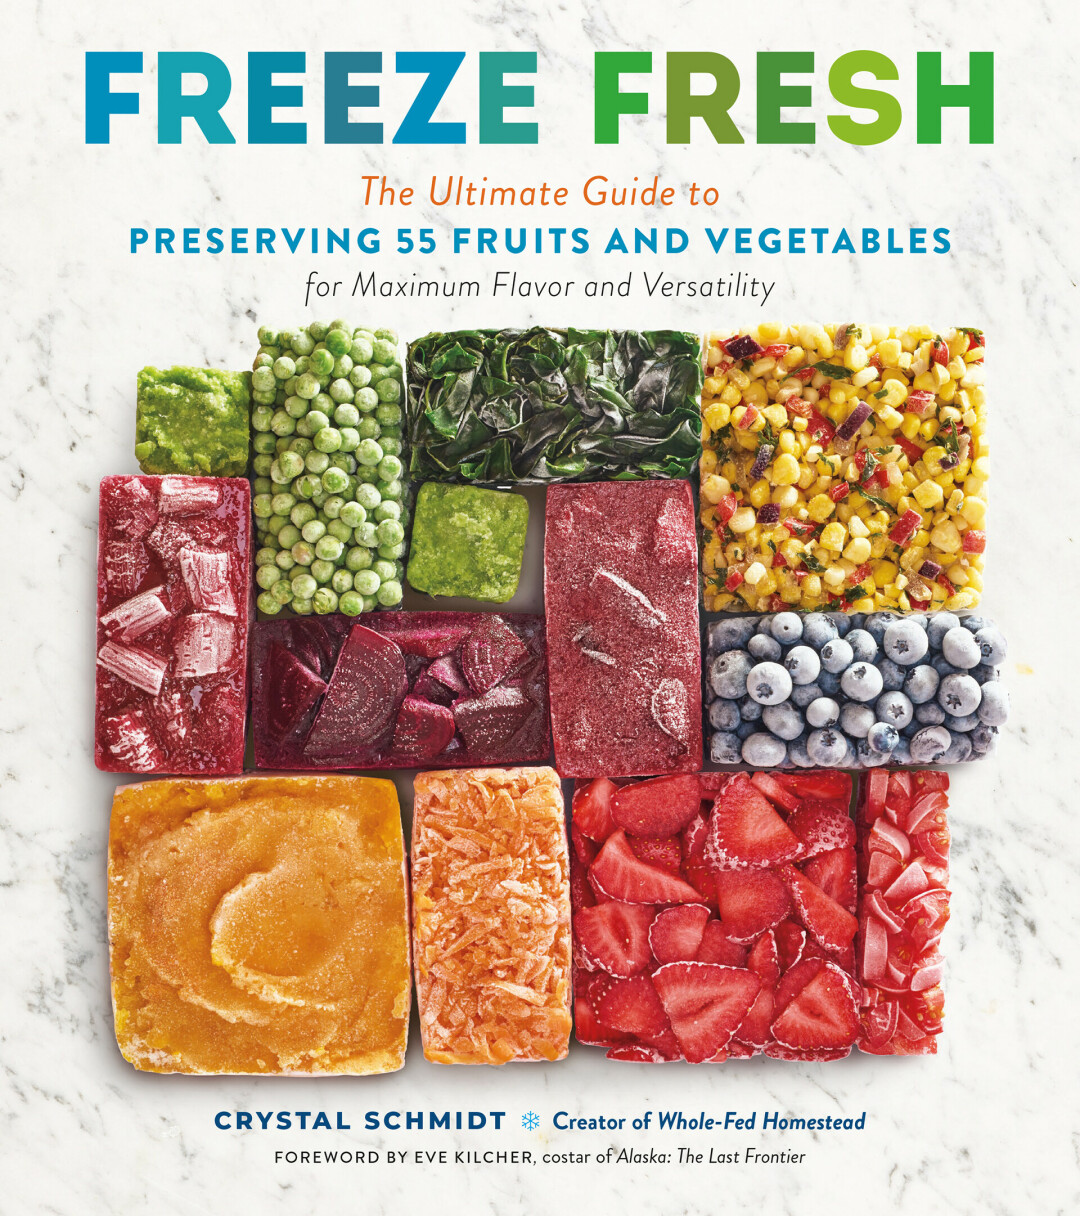 KEEP EM' FOR LONGER. Freeze Fresh, releasing July 5, goes into the freezing preservation process.